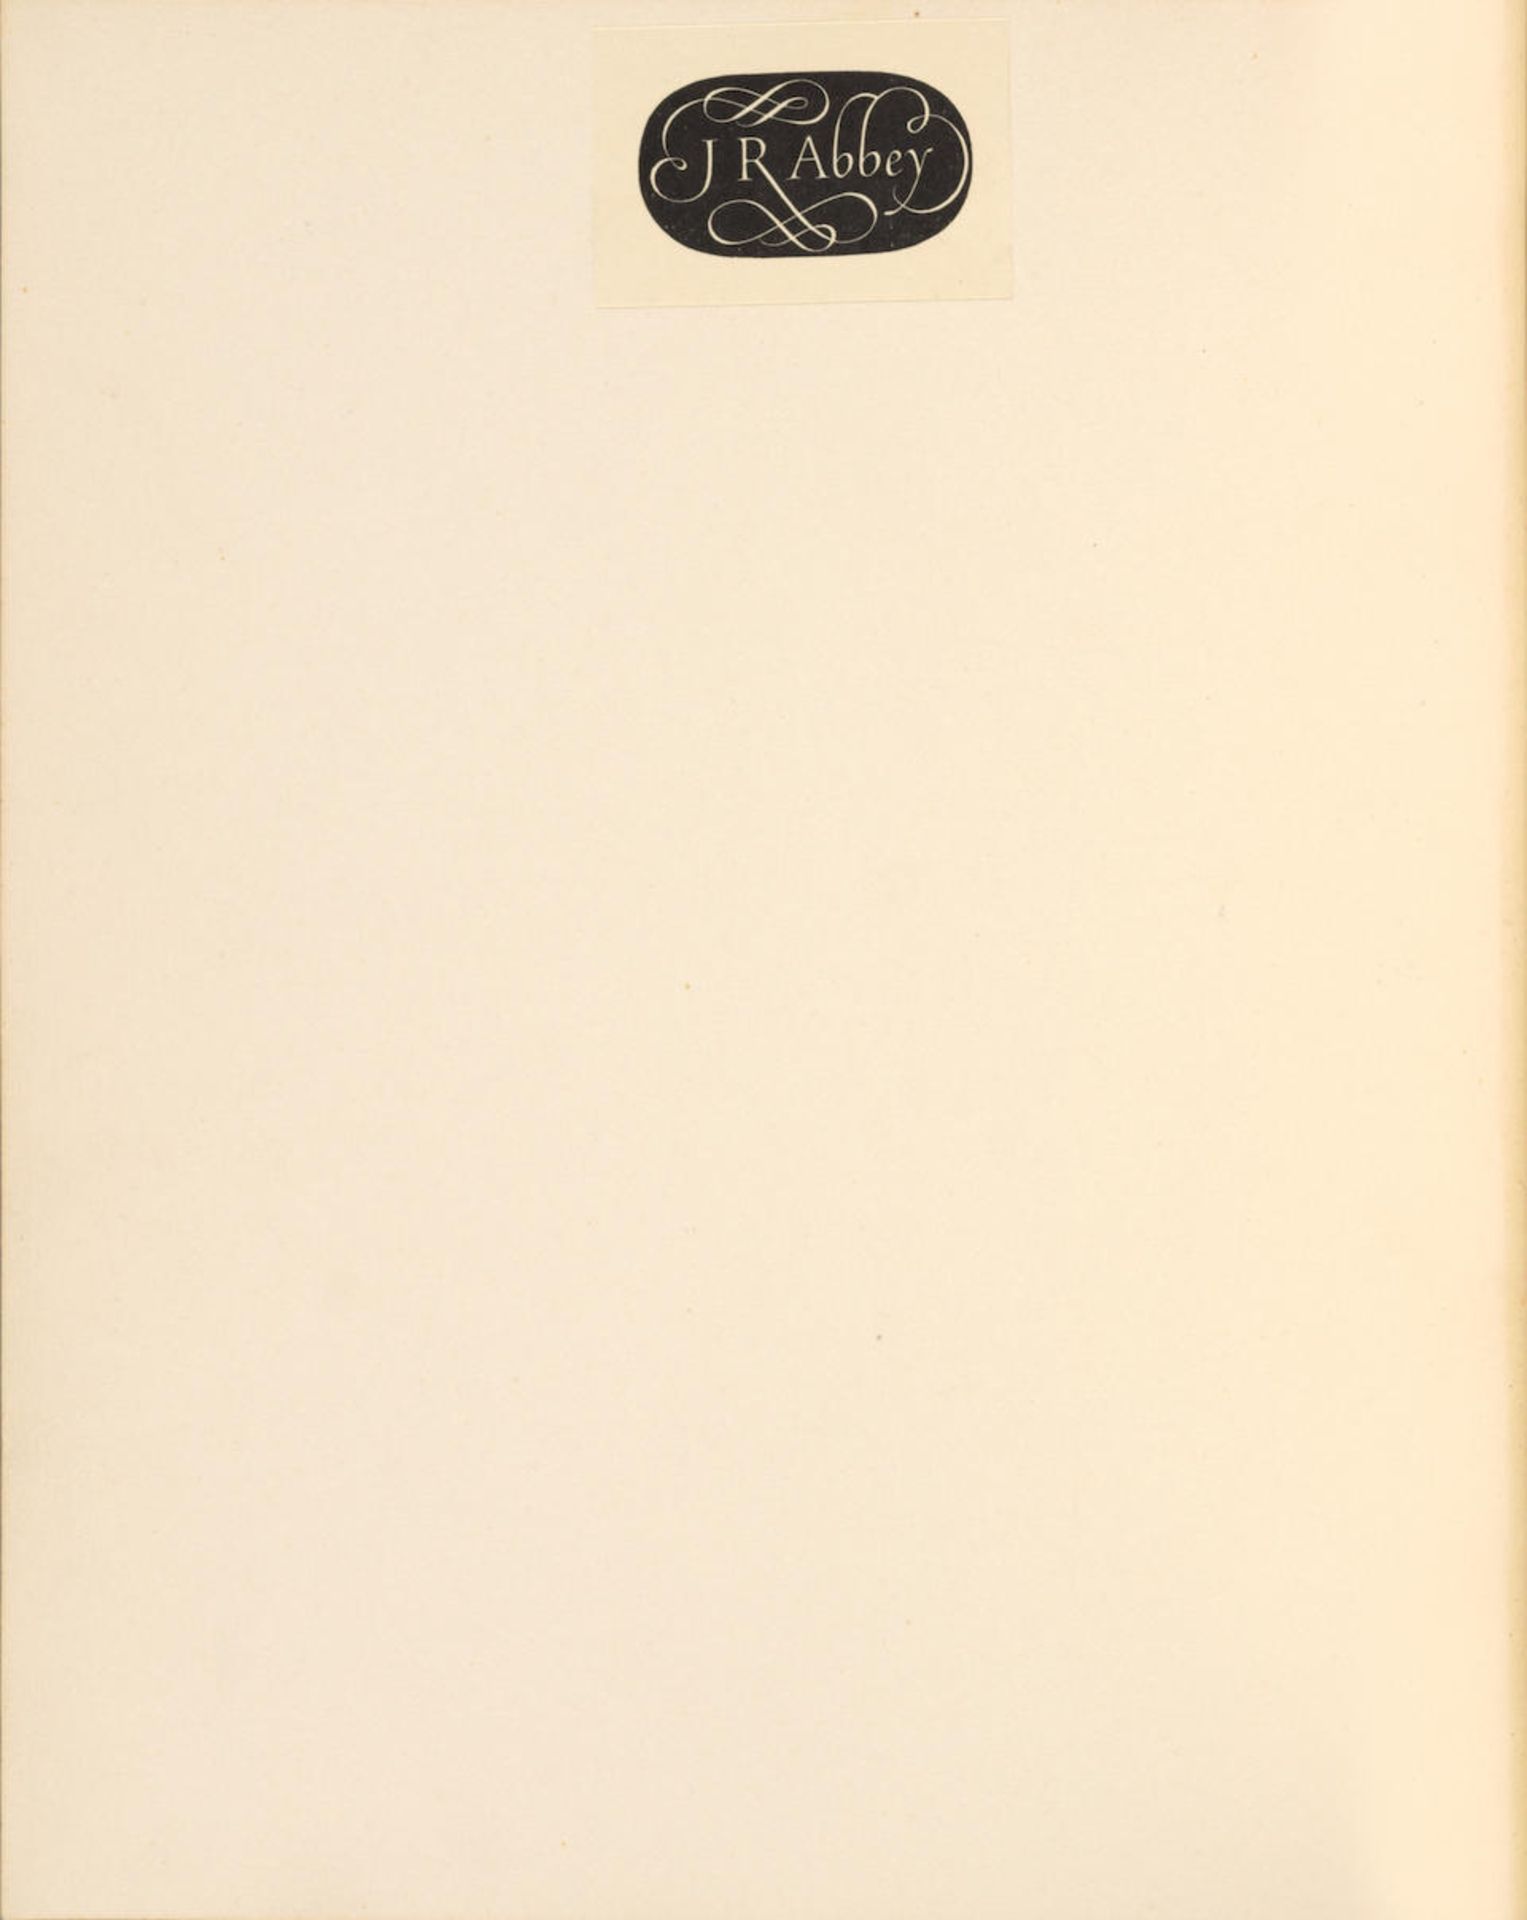 ARTIST BINDING BY PIERRE-LUCIEN MARTIN FROM THE COLLECTION OF J.R. ABBEY AND PIERRE BERES. KAFKA... - Image 3 of 4